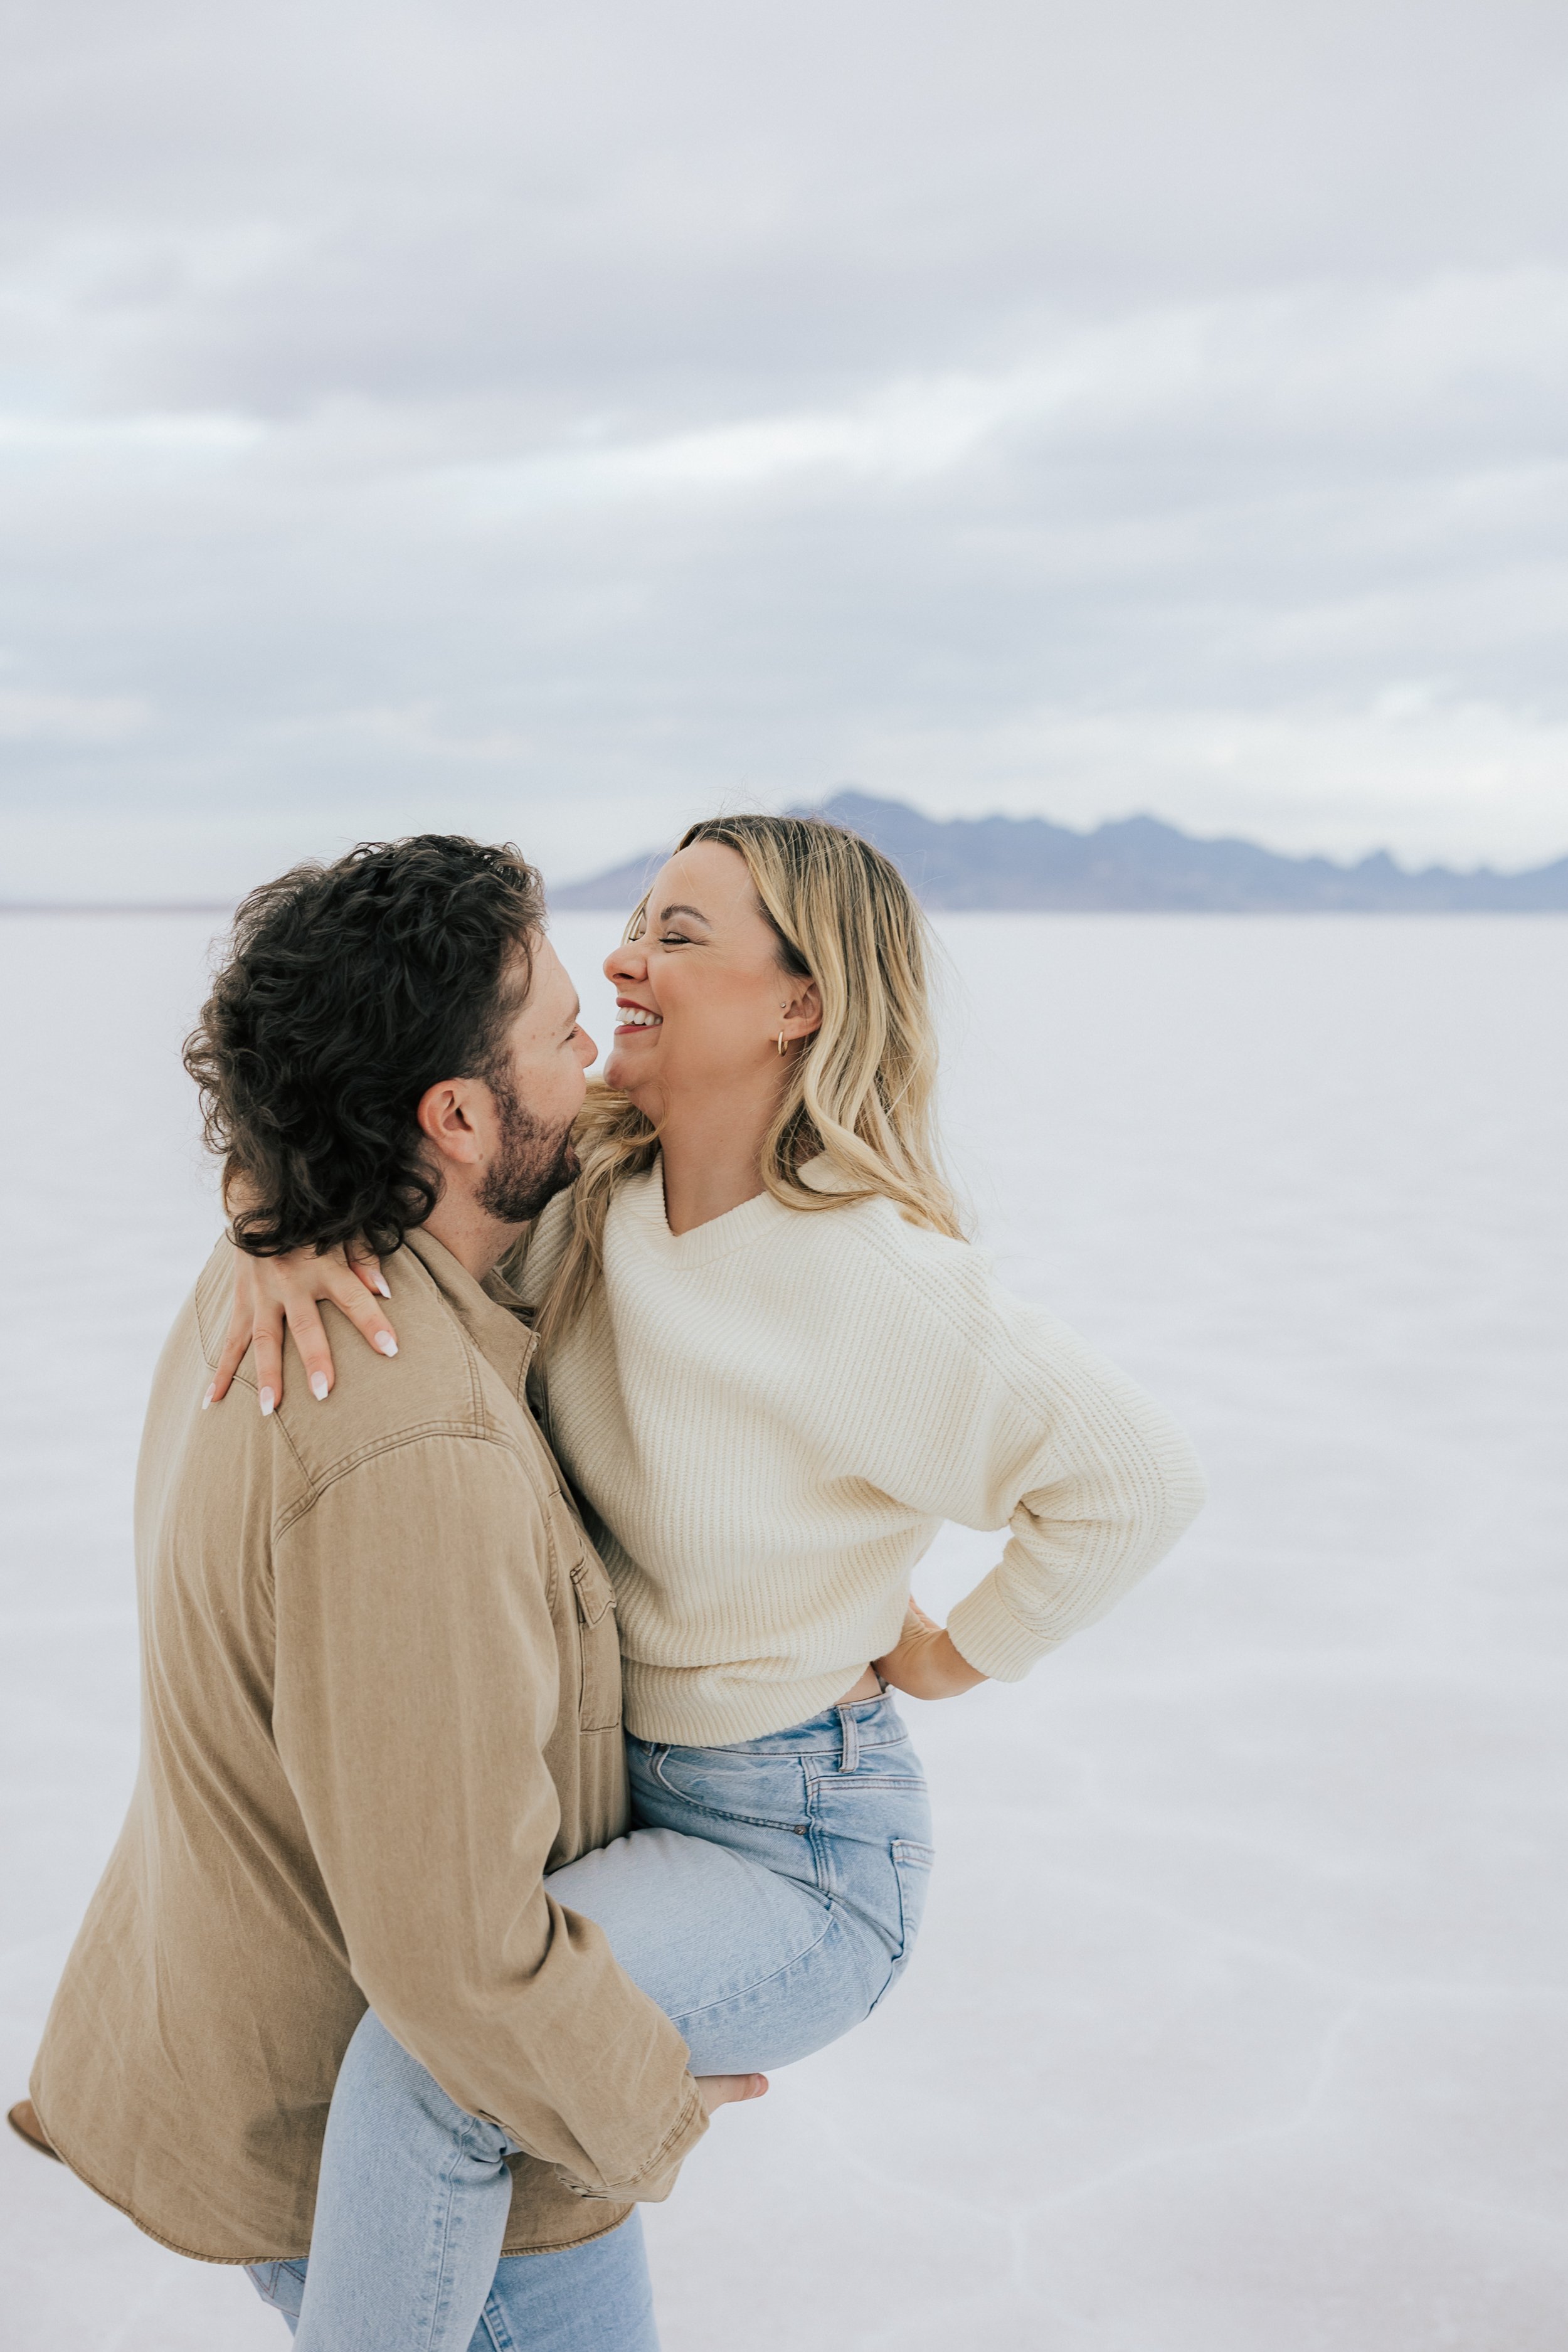  An engaged couple laughs and hugs as the man picks up and carries his girl for a photo at the Bonneville Salt Flats near Wendover, Nevada and Salt Lake City, Utah. The Salt Flats are white and the sky is overcast. The mountains show behind. Engageme